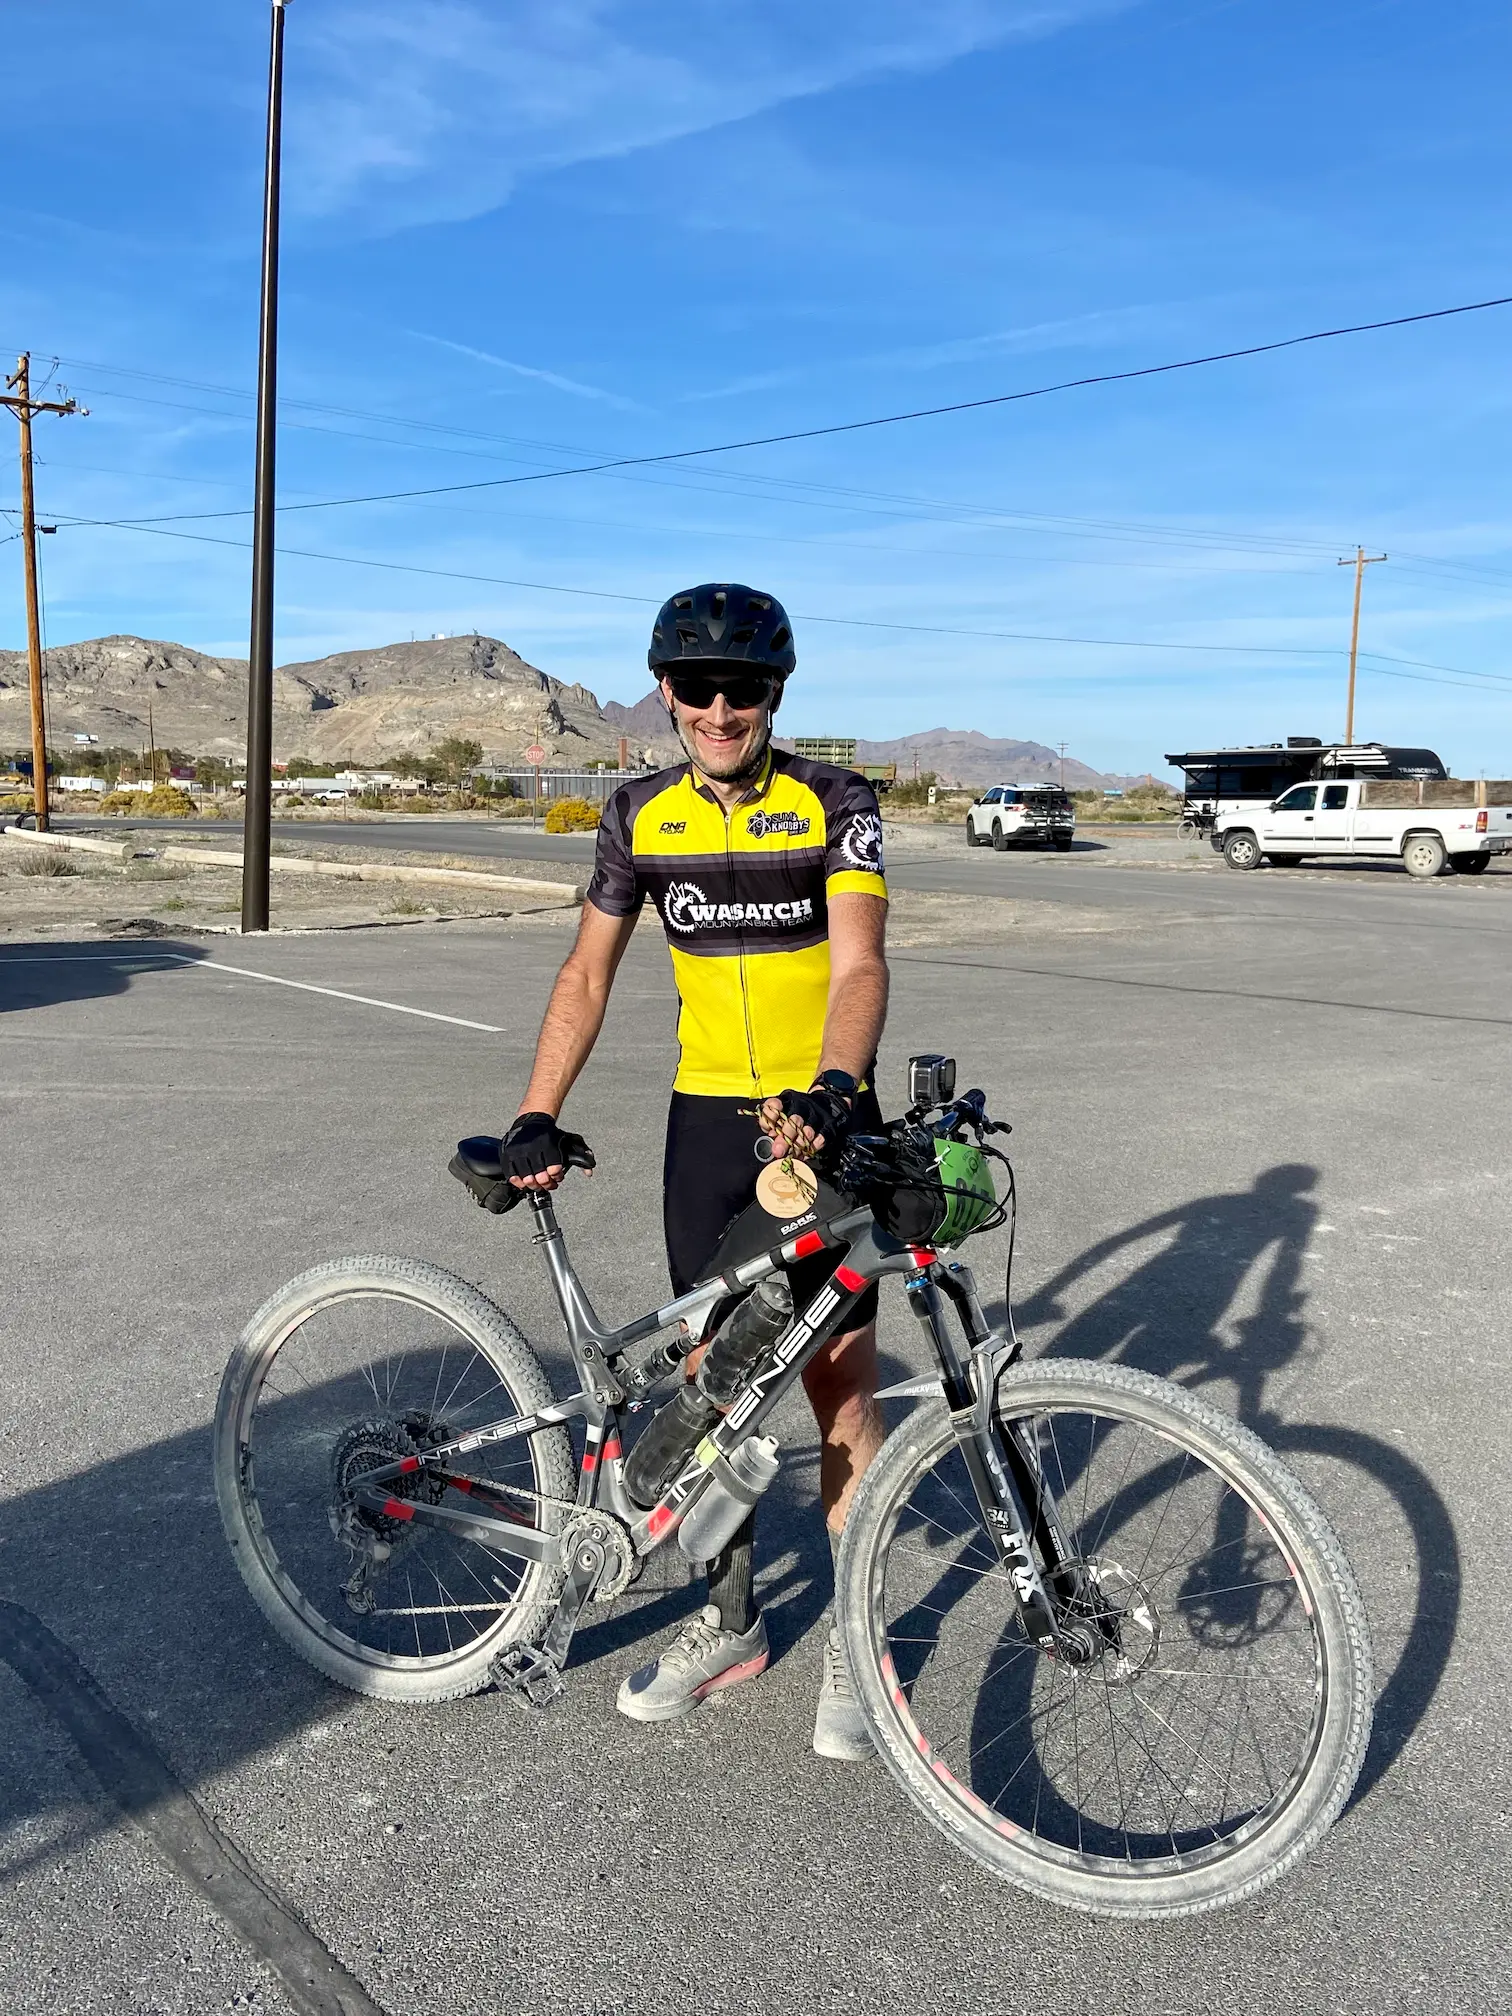 Keith is standing with his mountain bike after completing the Salty Lizard 100 gravel race